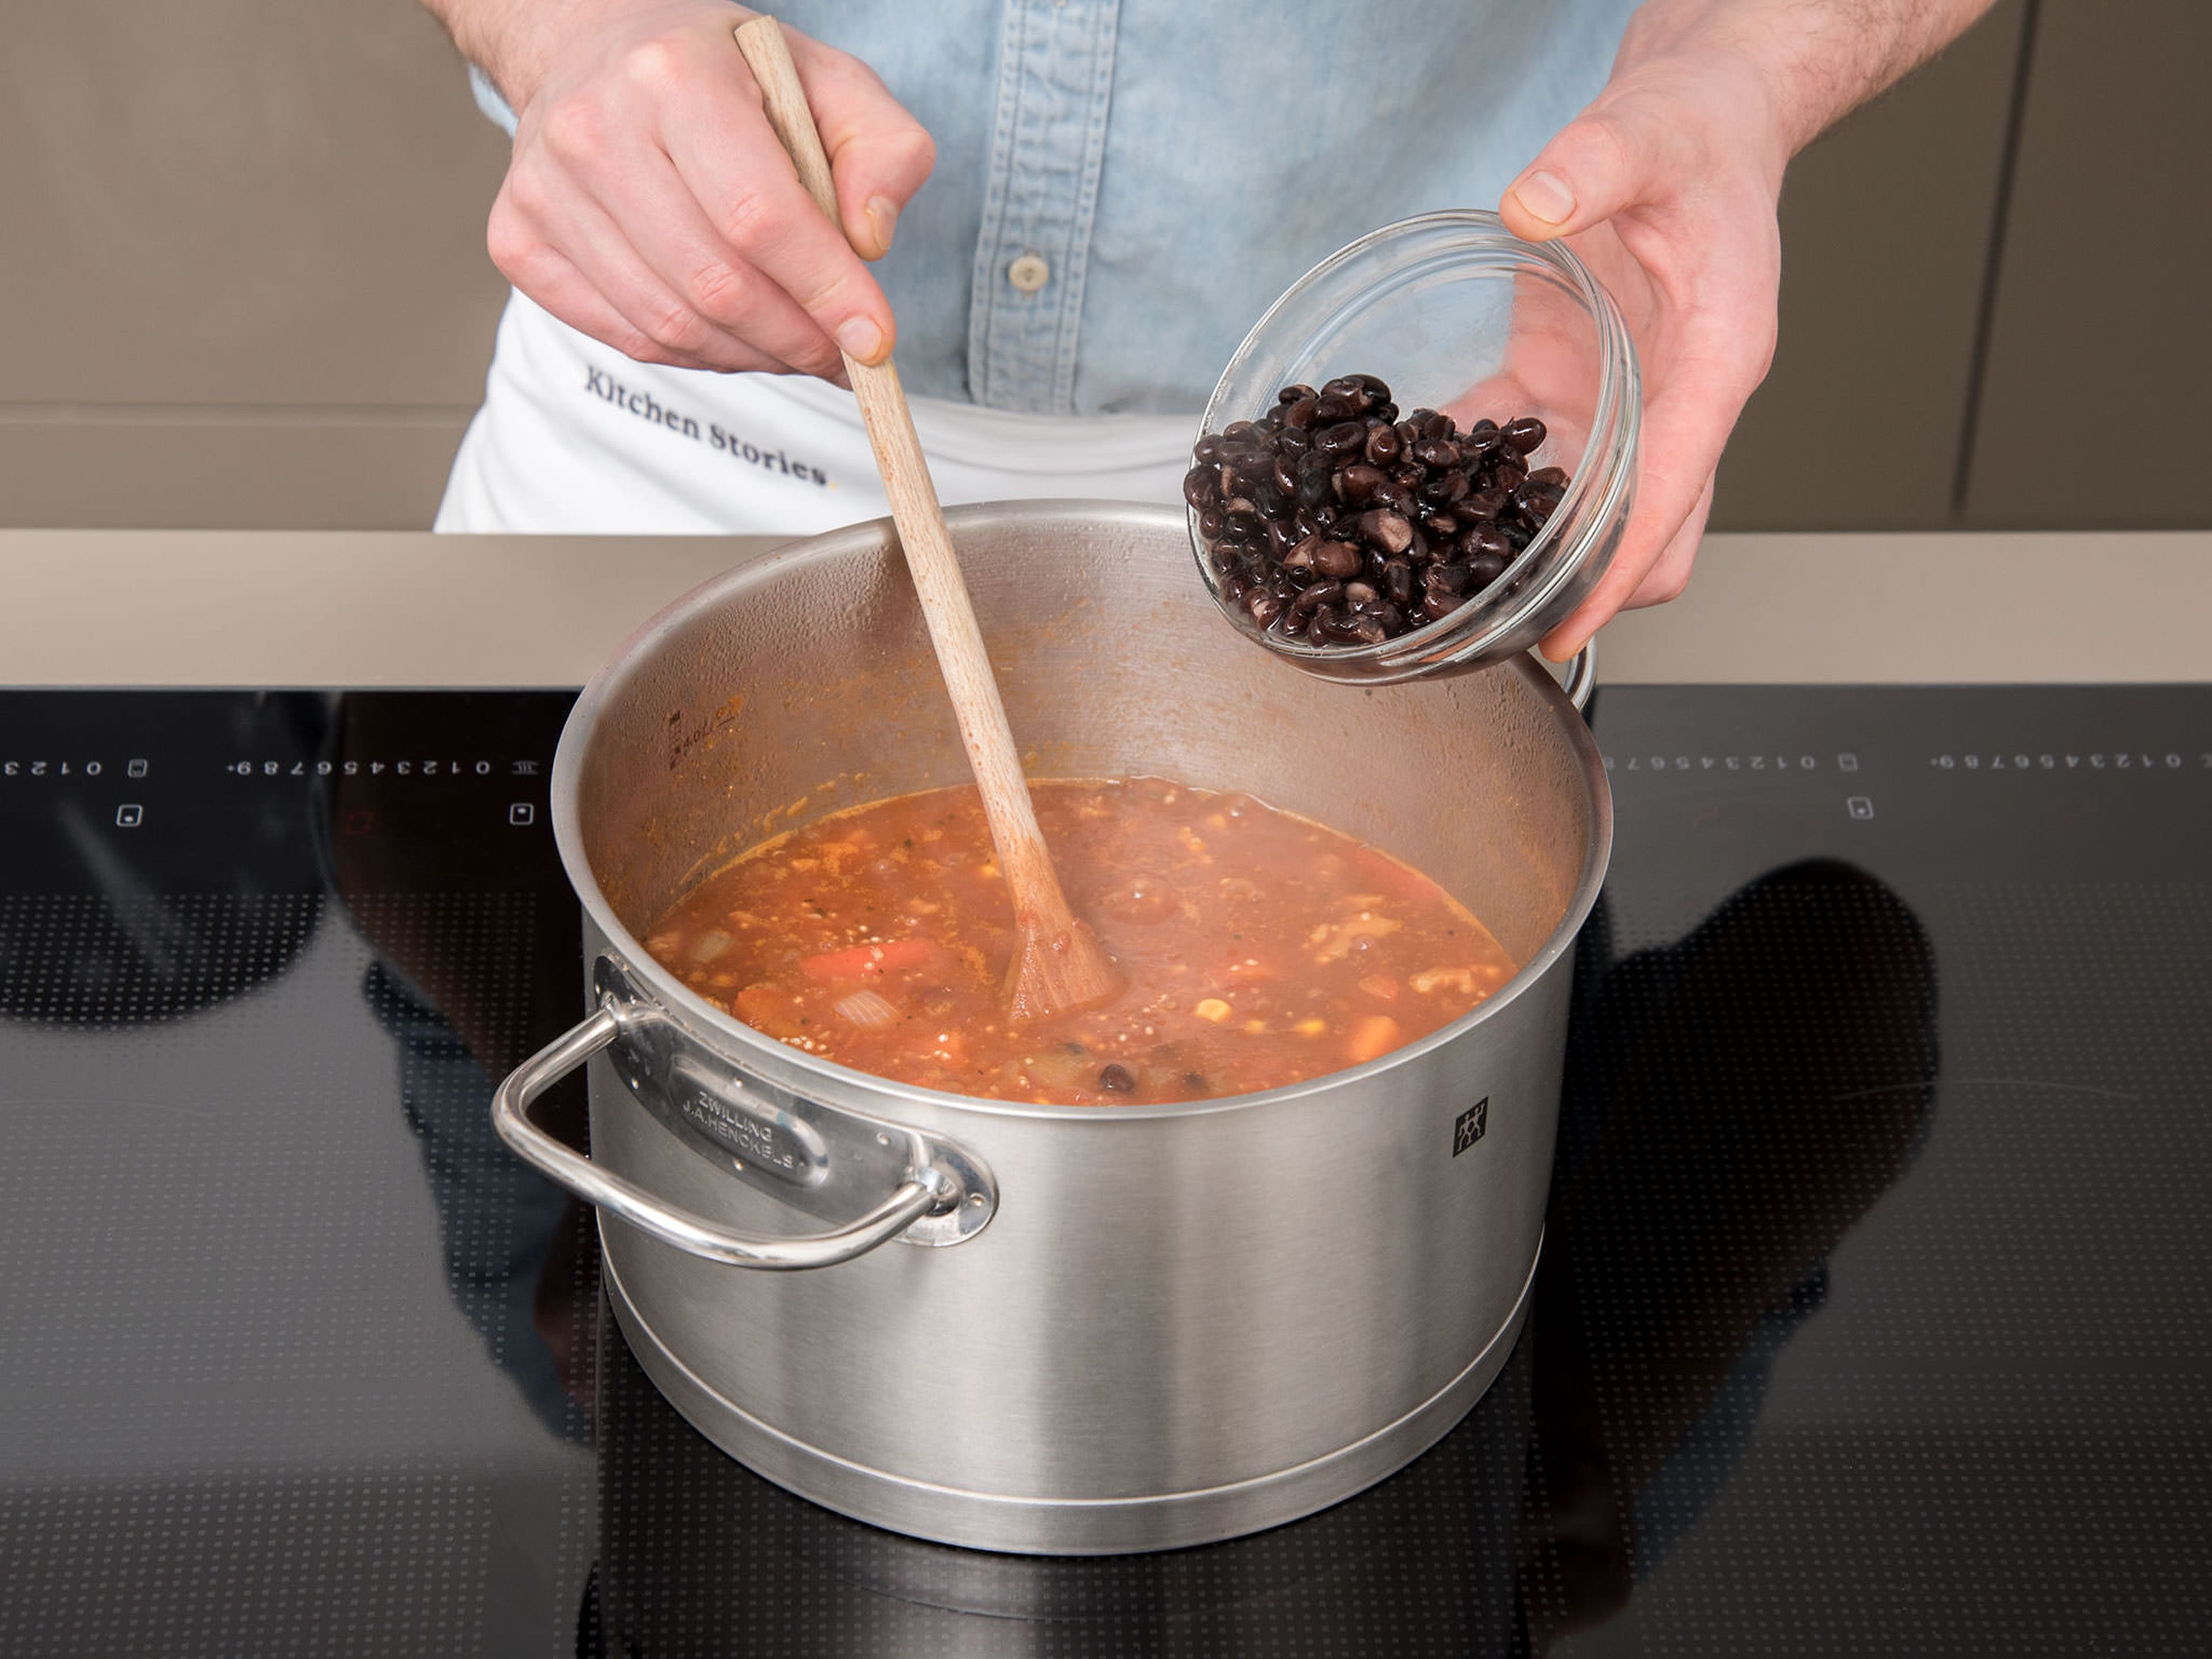 Add crushed tomatoes, vegetable stock, and quinoa to the pot. Season with soy sauce, cane sugar, salt and pepper. Bring to a boil and let cook, covered, for approx. 15 – 20 min. During the last 5 min., add black beans, kidney beans, corn, and walnuts to the pot.